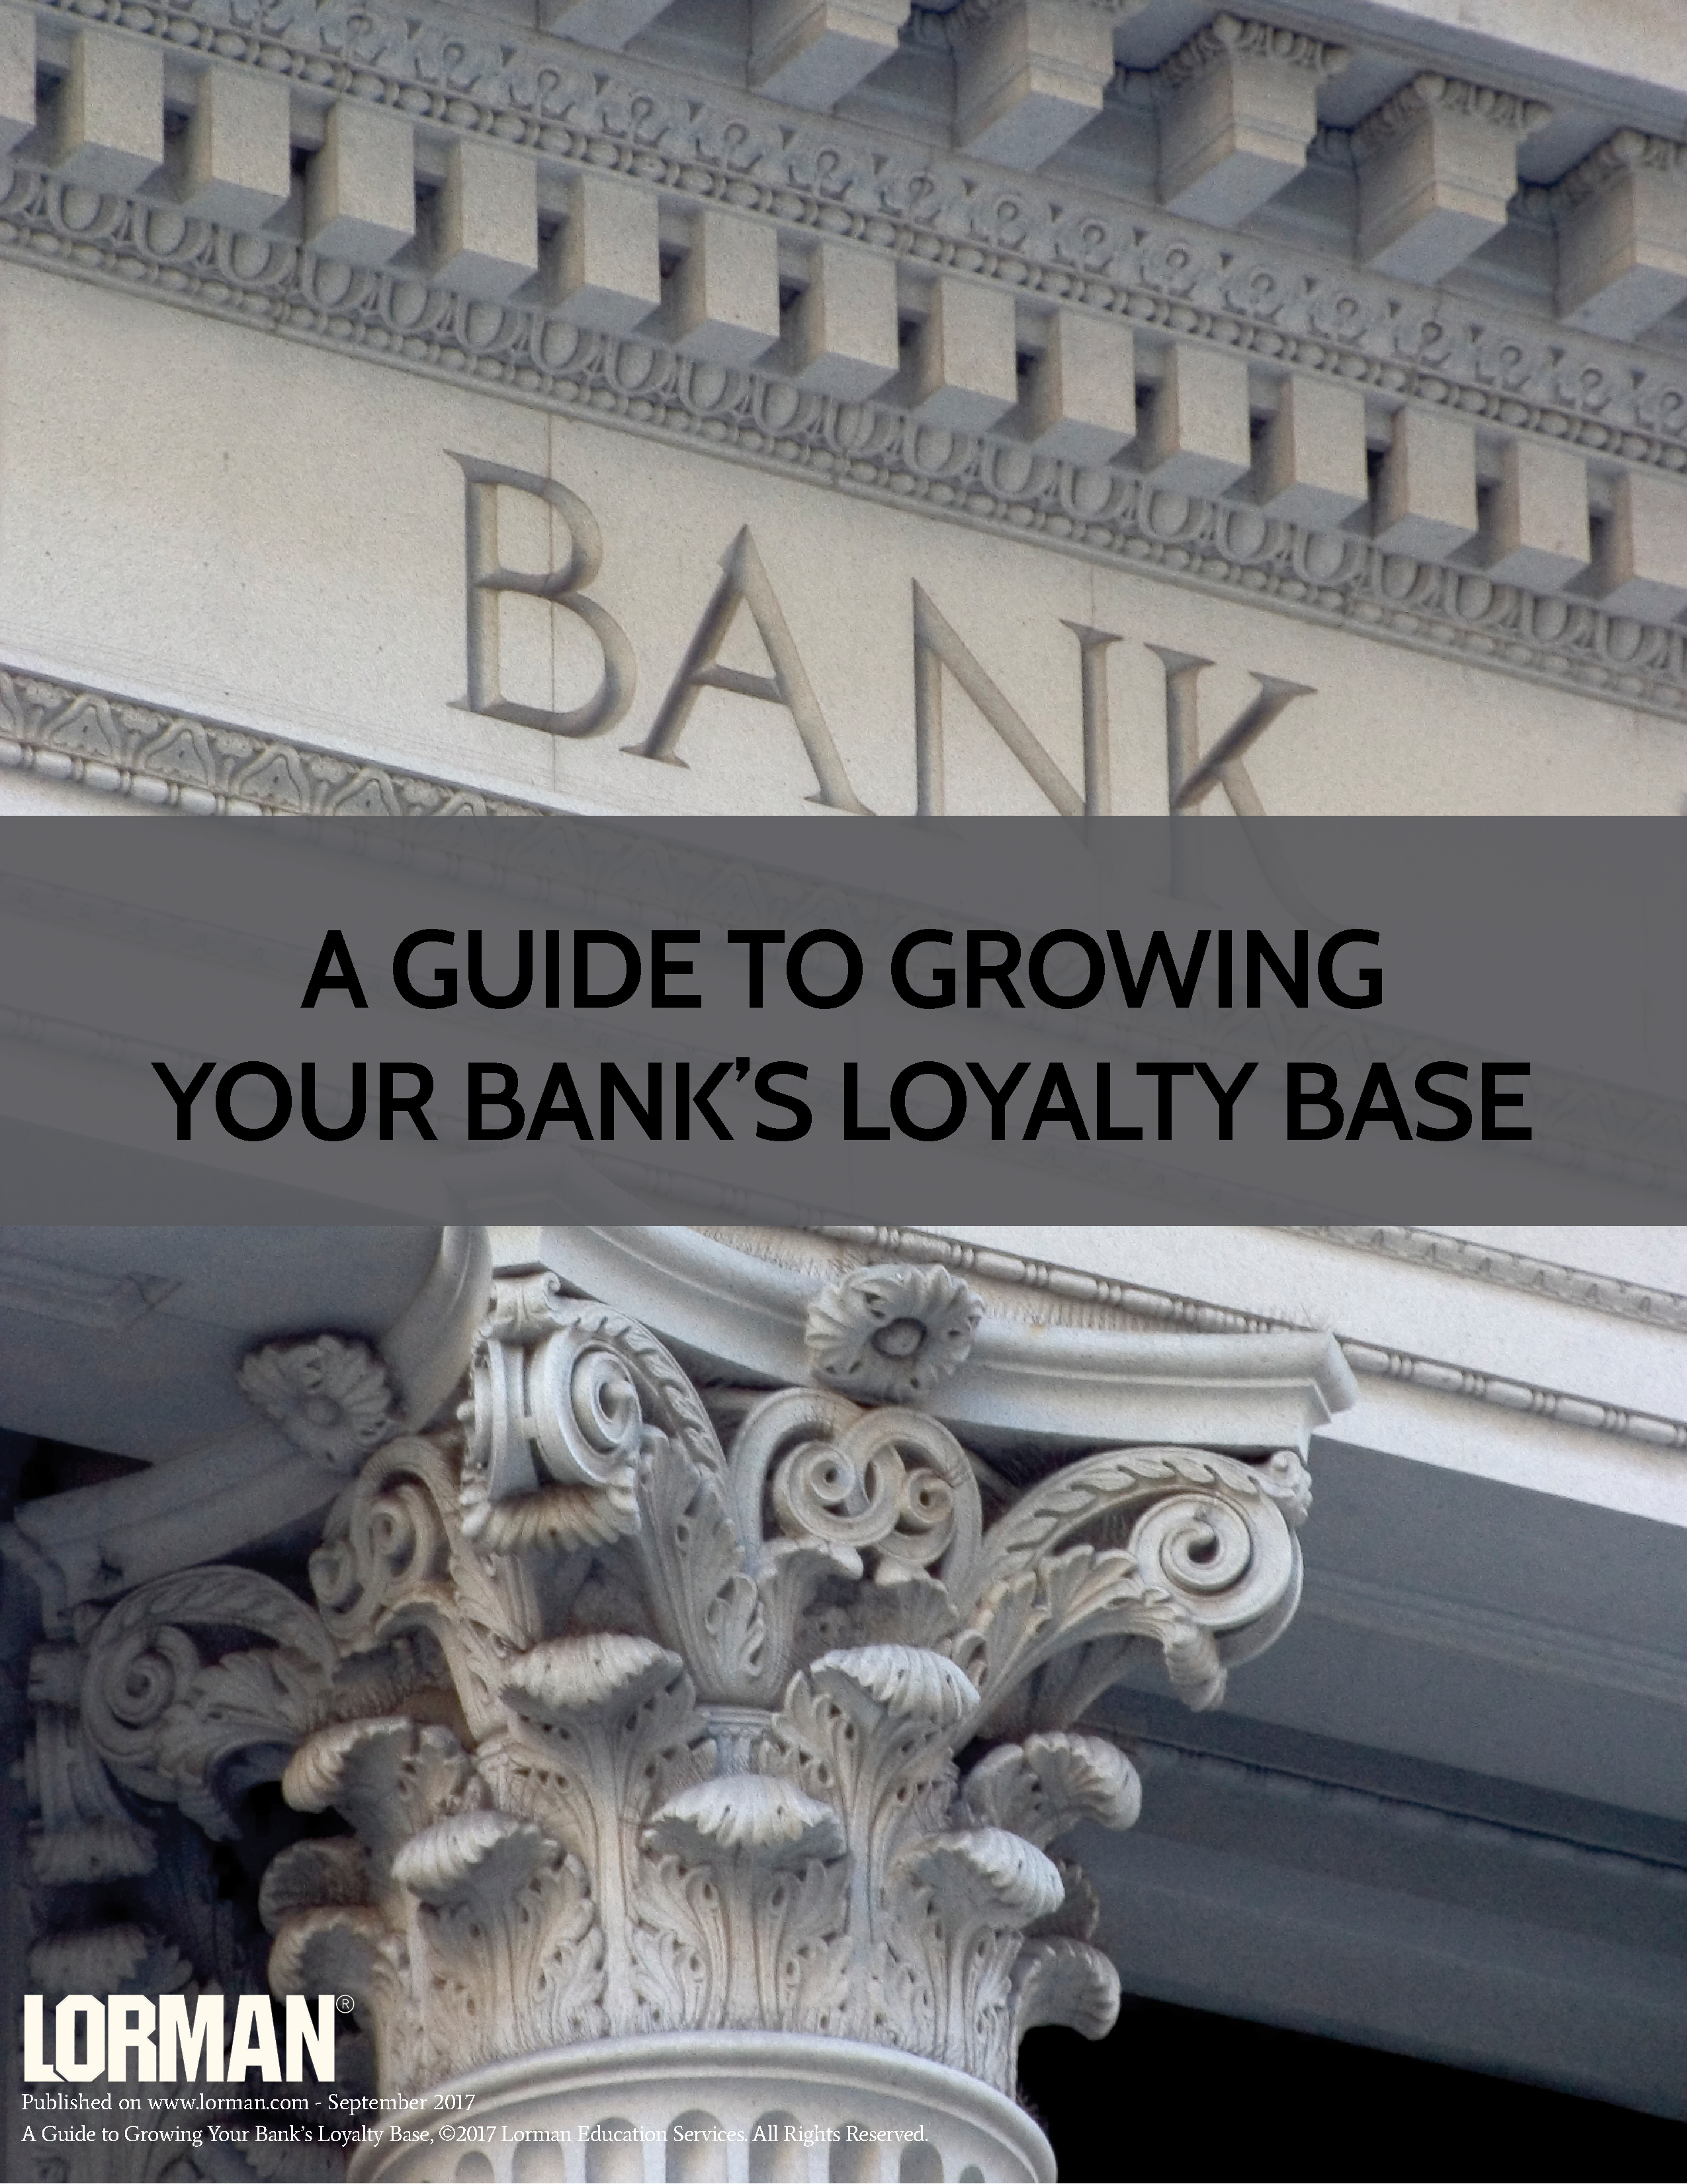 A Guide to Growing Your Bank's Loyalty Base